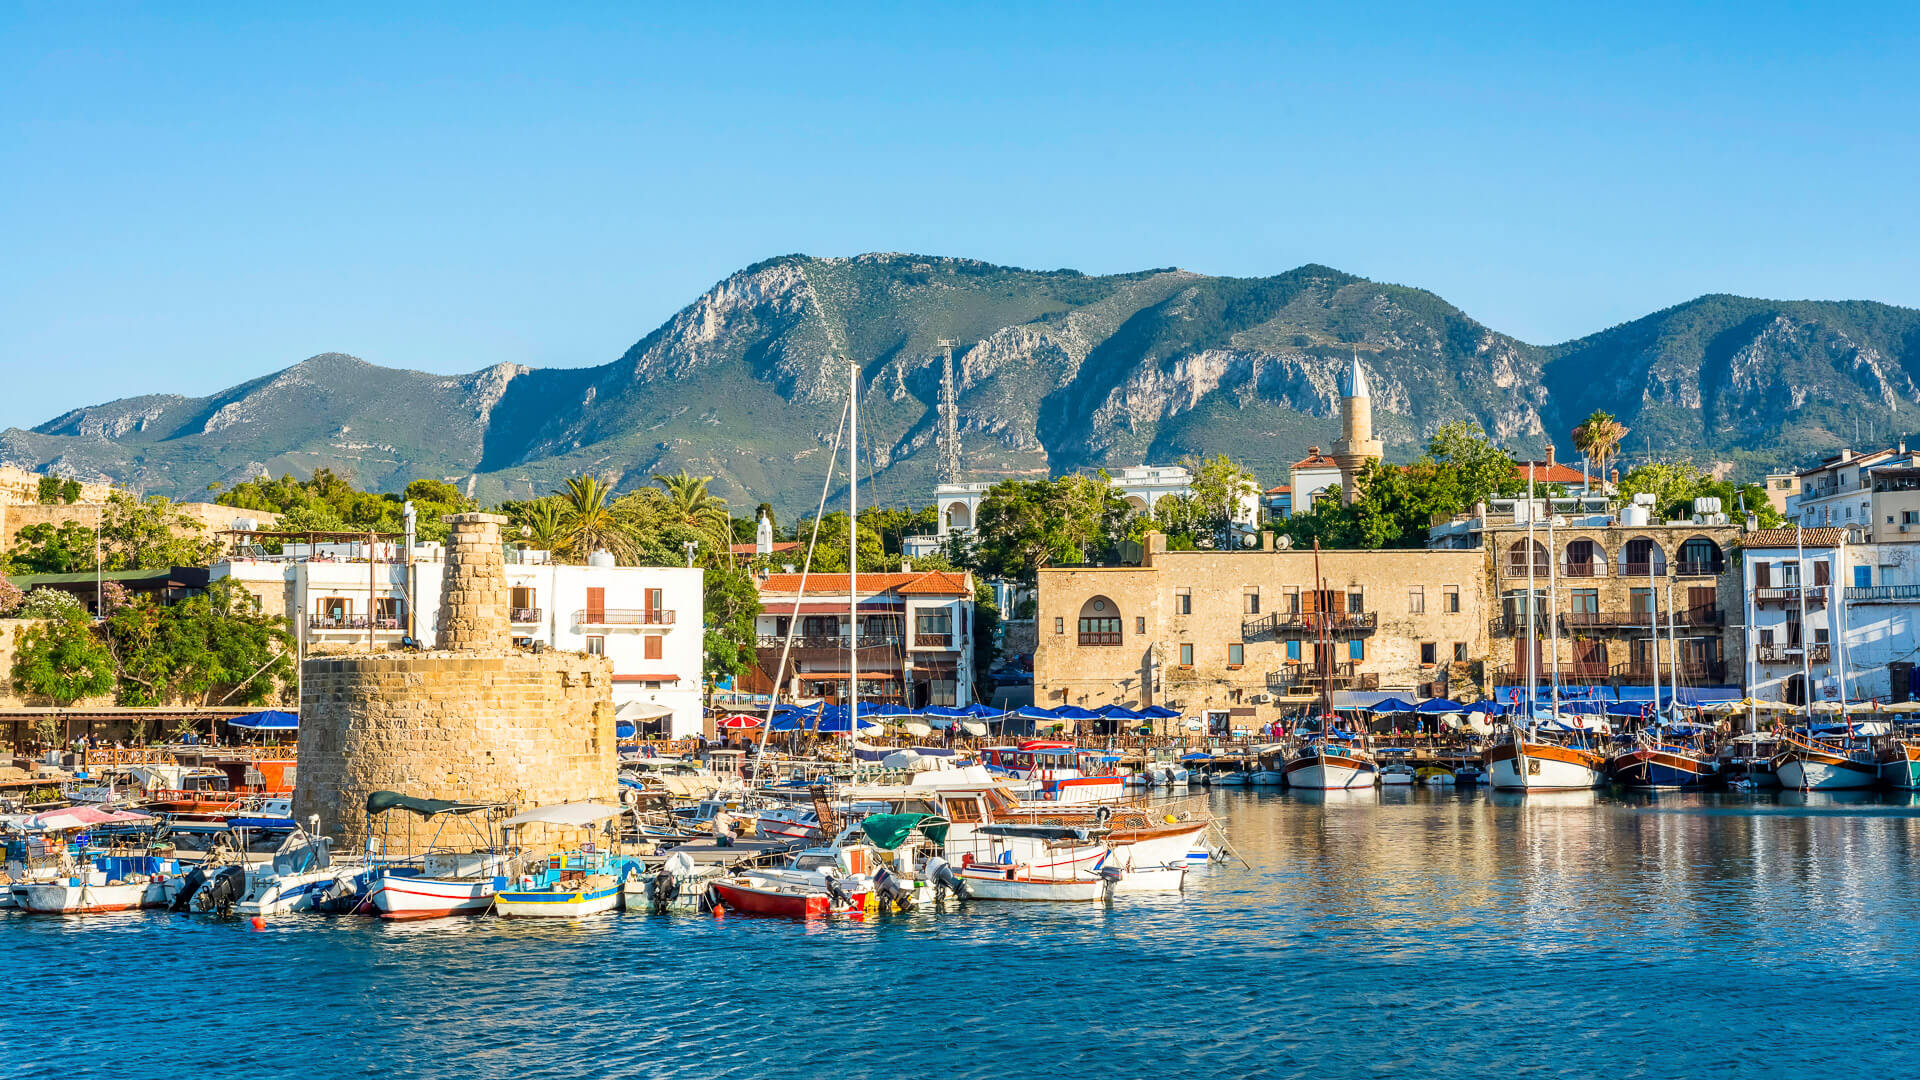 <p><strong>Average monthly cost</strong>: $1,500</p> <p>Another island destination in the Mediterranean, Cyprus has become a popular vacation spot and haven for retirees. While Greek and Turkish are the official languages, most people there speak English, and location signs and menus offer English translation. An individual can retire there on just $1,500 per month, with housing and other costs being significantly lower than the U.S.</p>  <p><strong>More From GOBankingRates</strong></p>   <ul> <li><a href="https://www.gobankingrates.com/money/wealth/4-best-money-lessons-from-elon-musk/?utm_term=incontent_link_3&utm_campaign=1238461&utm_source=msn.com&utm_content=10&utm_medium=rss" rel=""><strong>4 Best Money Lessons From Elon Musk</strong></a></li> <li><a href="https://www.gobankingrates.com/money/making-money/chatgpt-plugins/?utm_term=incontent_link_4&utm_campaign=1238461&utm_source=msn.com&utm_content=11&utm_medium=rss"><strong>11 Best ChatGPT Plugins To Use for Making Money</strong></a></li> <li><a href="https://www.gobankingrates.com/top-alternative-investments-1270486/?utm_source=msn.com&utm_term=incontent_link_5&utm_campaign=1238461&utm_content=12&utm_medium=rss" rel="noreferrer noopener sponsored"><strong>3 Things You Must Do When Your Savings Reach $50,000</strong></a></li> <li><strong><a href="https://www.gobankingrates.com/money/finance/money-moves-you-should-make-this-week/?utm_term=incontent_link_6&utm_campaign=1238461&utm_source=msn.com&utm_content=13&utm_medium=rss" rel="sponsored">9 Money Moves You Should Make This Week</a></strong></li> </ul>